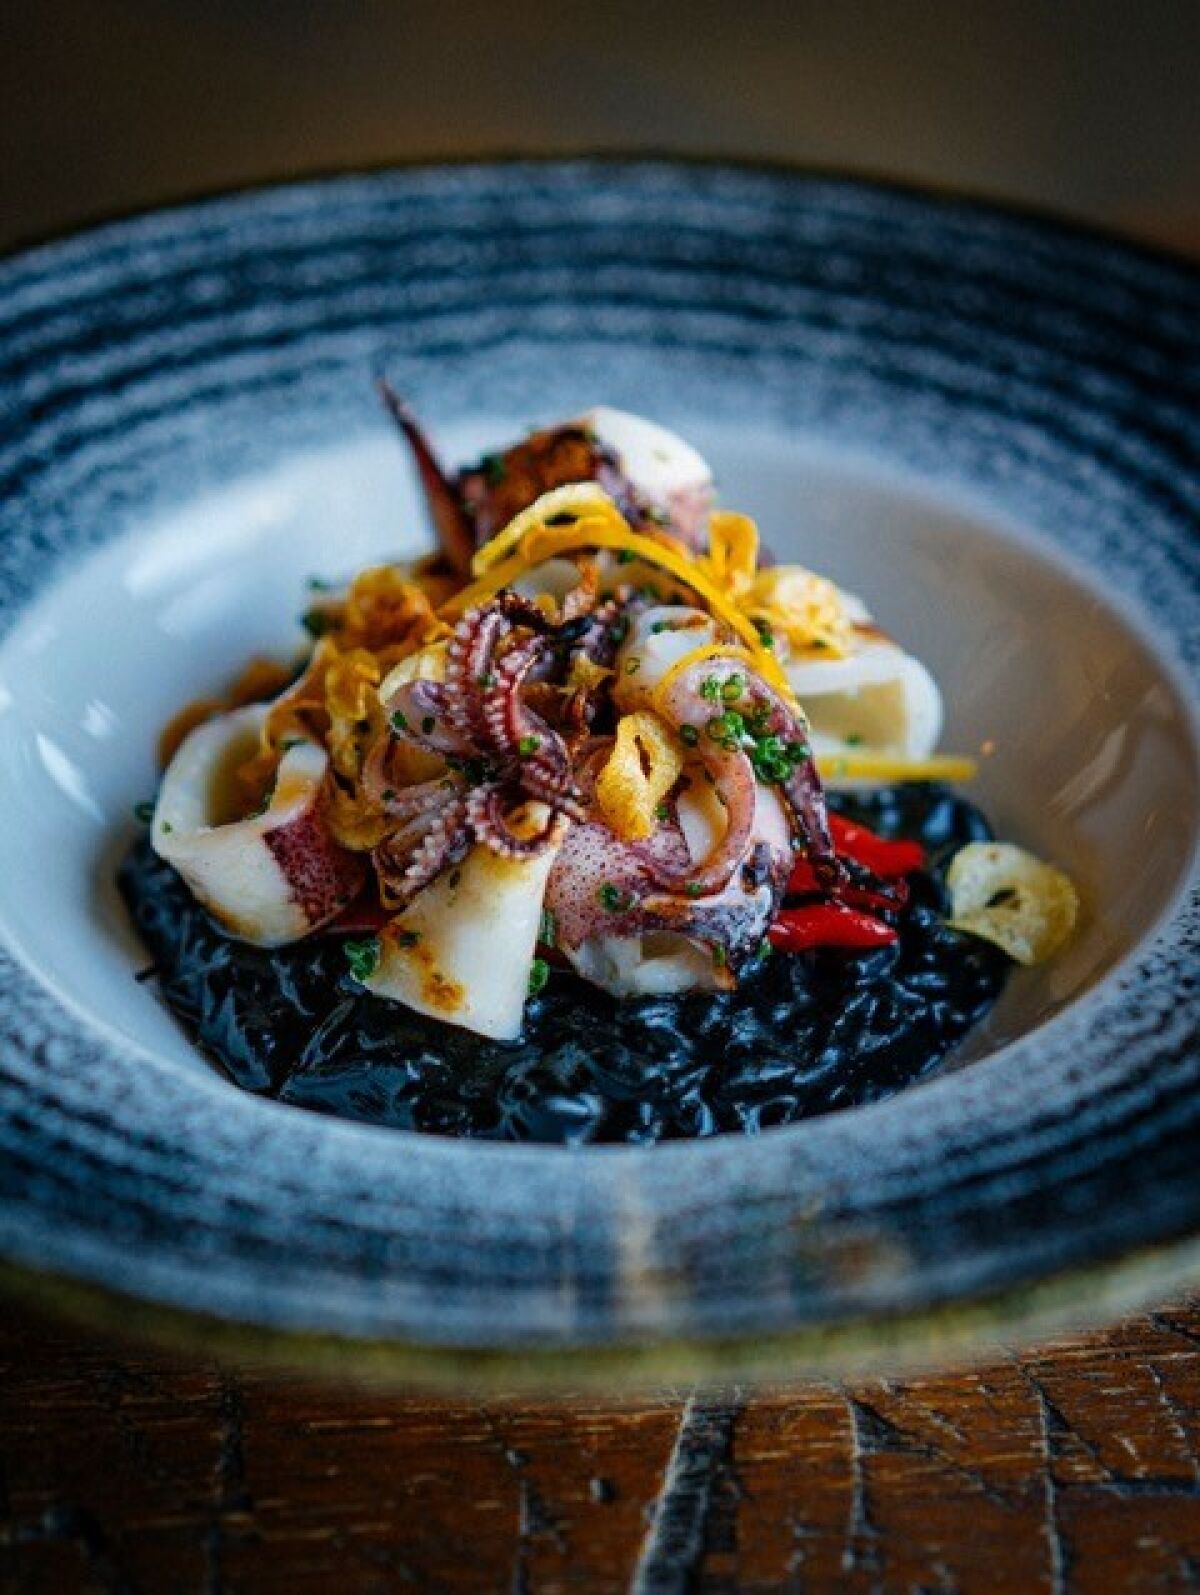 California Market Squid Ink Risotto at The Fishery.